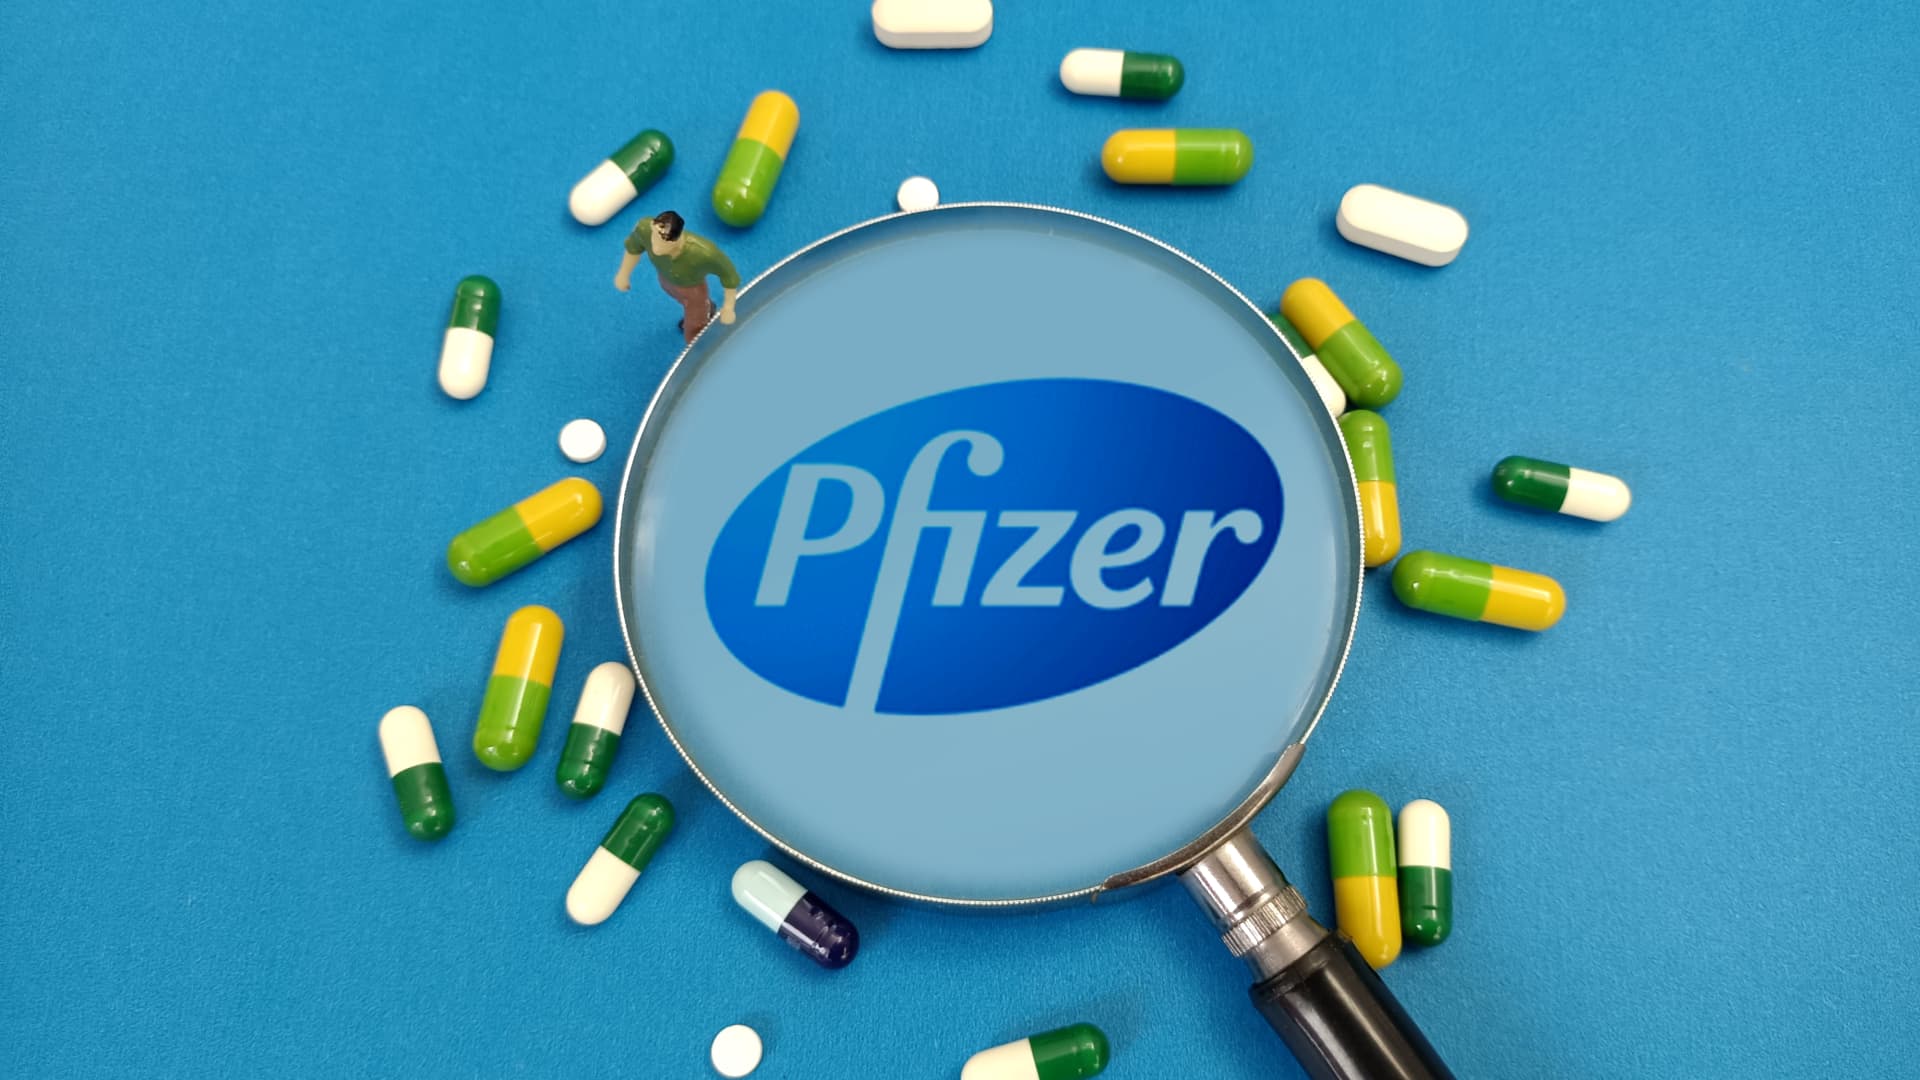 Pfizer drug against lung cancer shows promising long-term research results